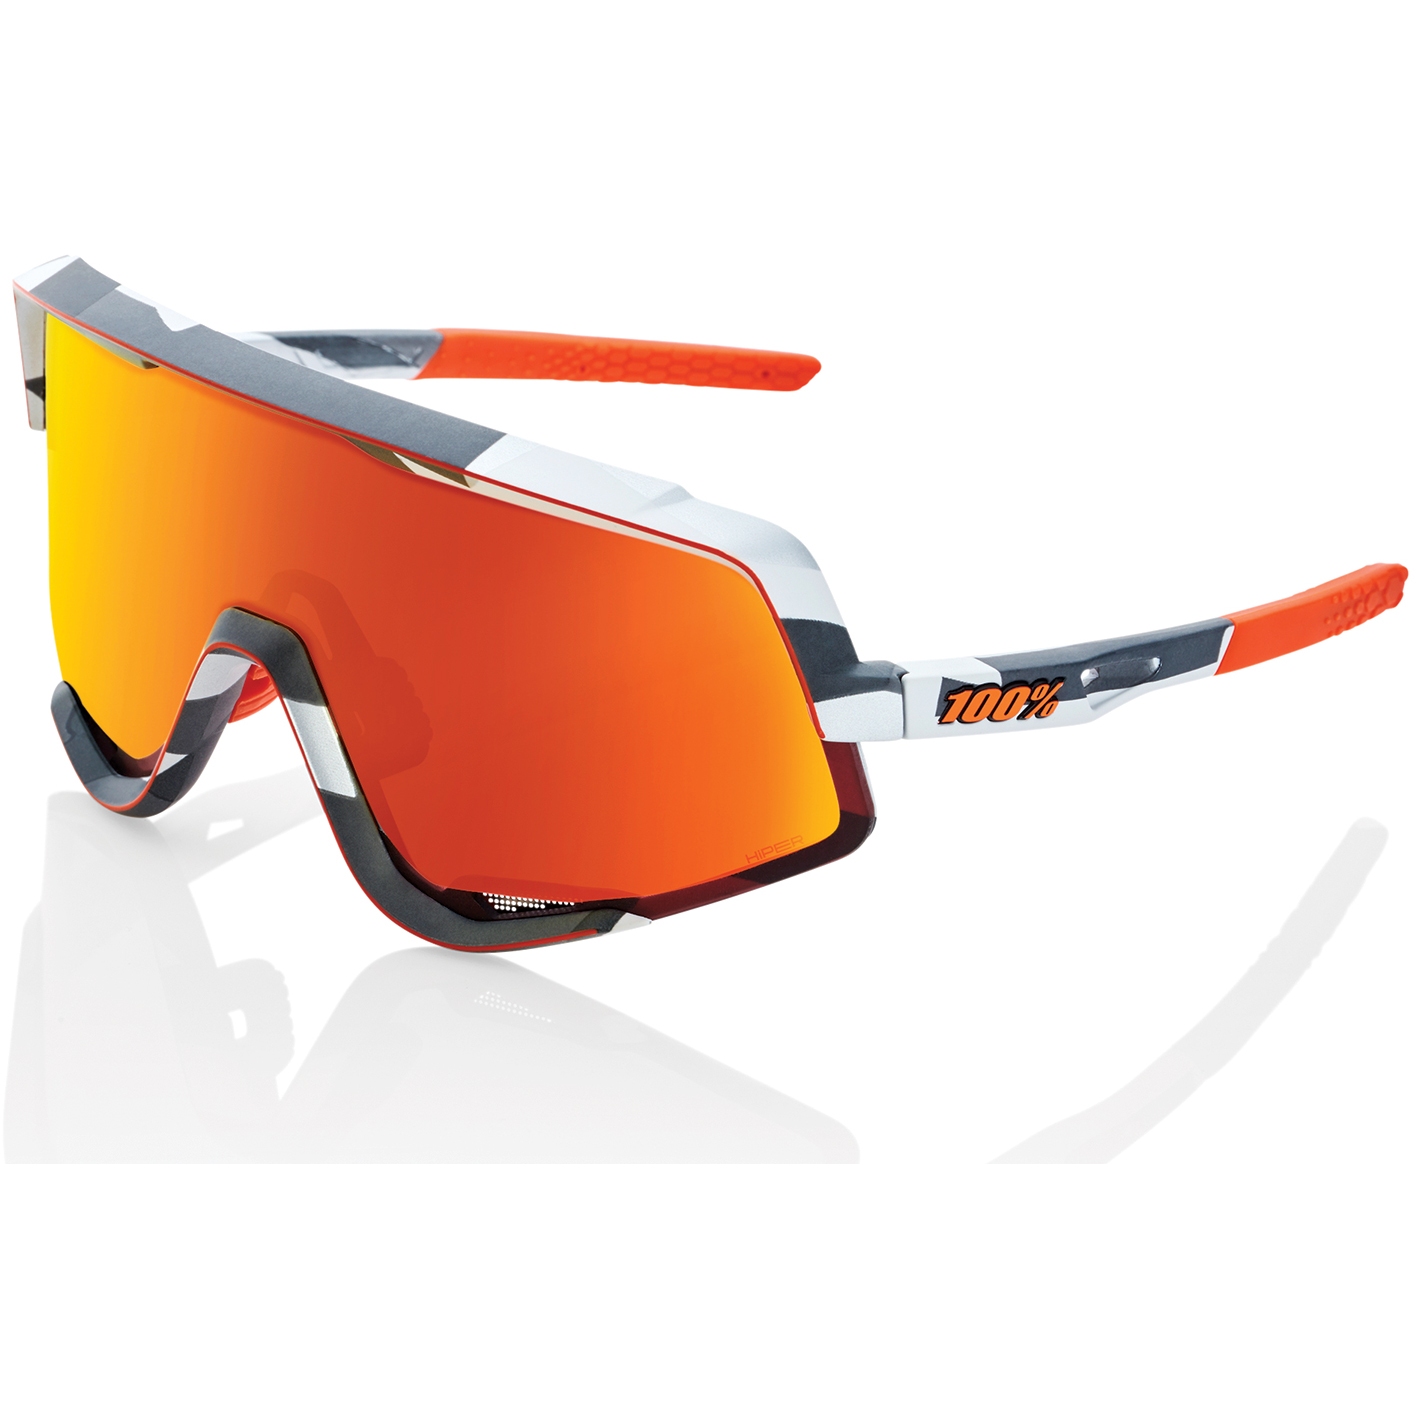 Productfoto van 100% Glendale Bril - HiPER Mirror Lens - Soft Tact Grey Camo / Red + Clear